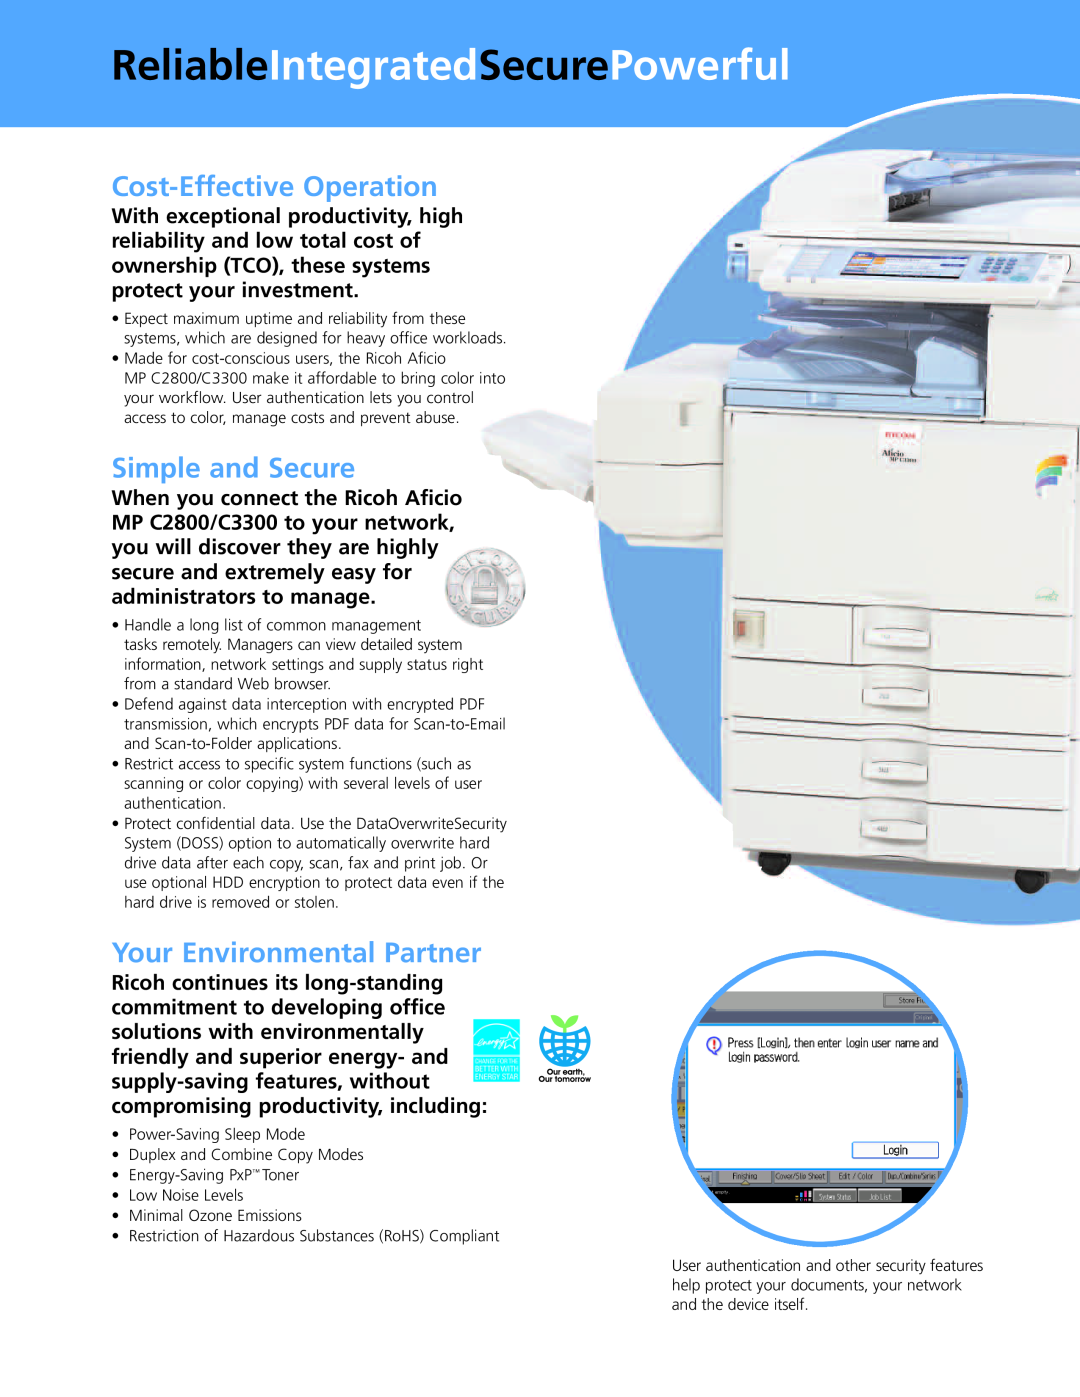 Ricoh MP C2800 ReliableIntegratedSecurePowerful, Cost-Effective Operation, Simple and Secure, Your Environmental Partner 